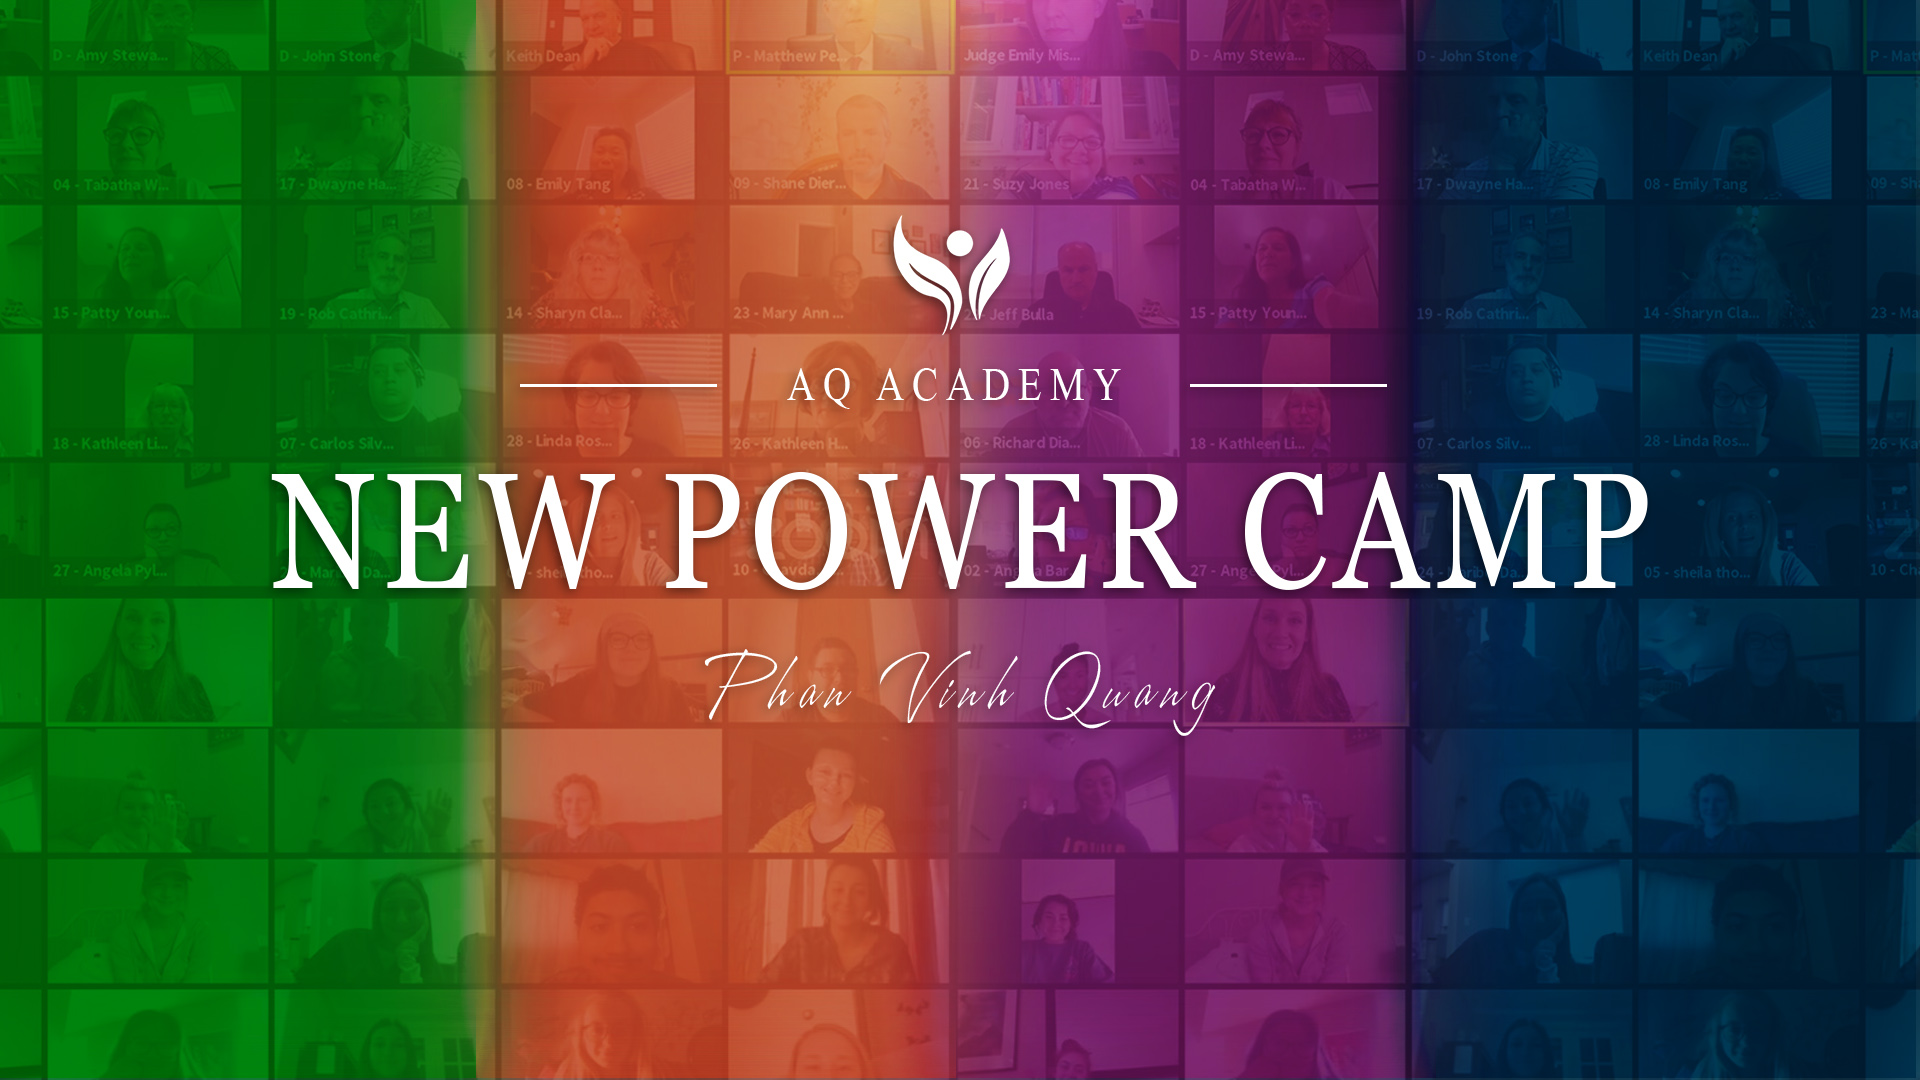 NEW POWER CAMP - MASTERY PEOPLE